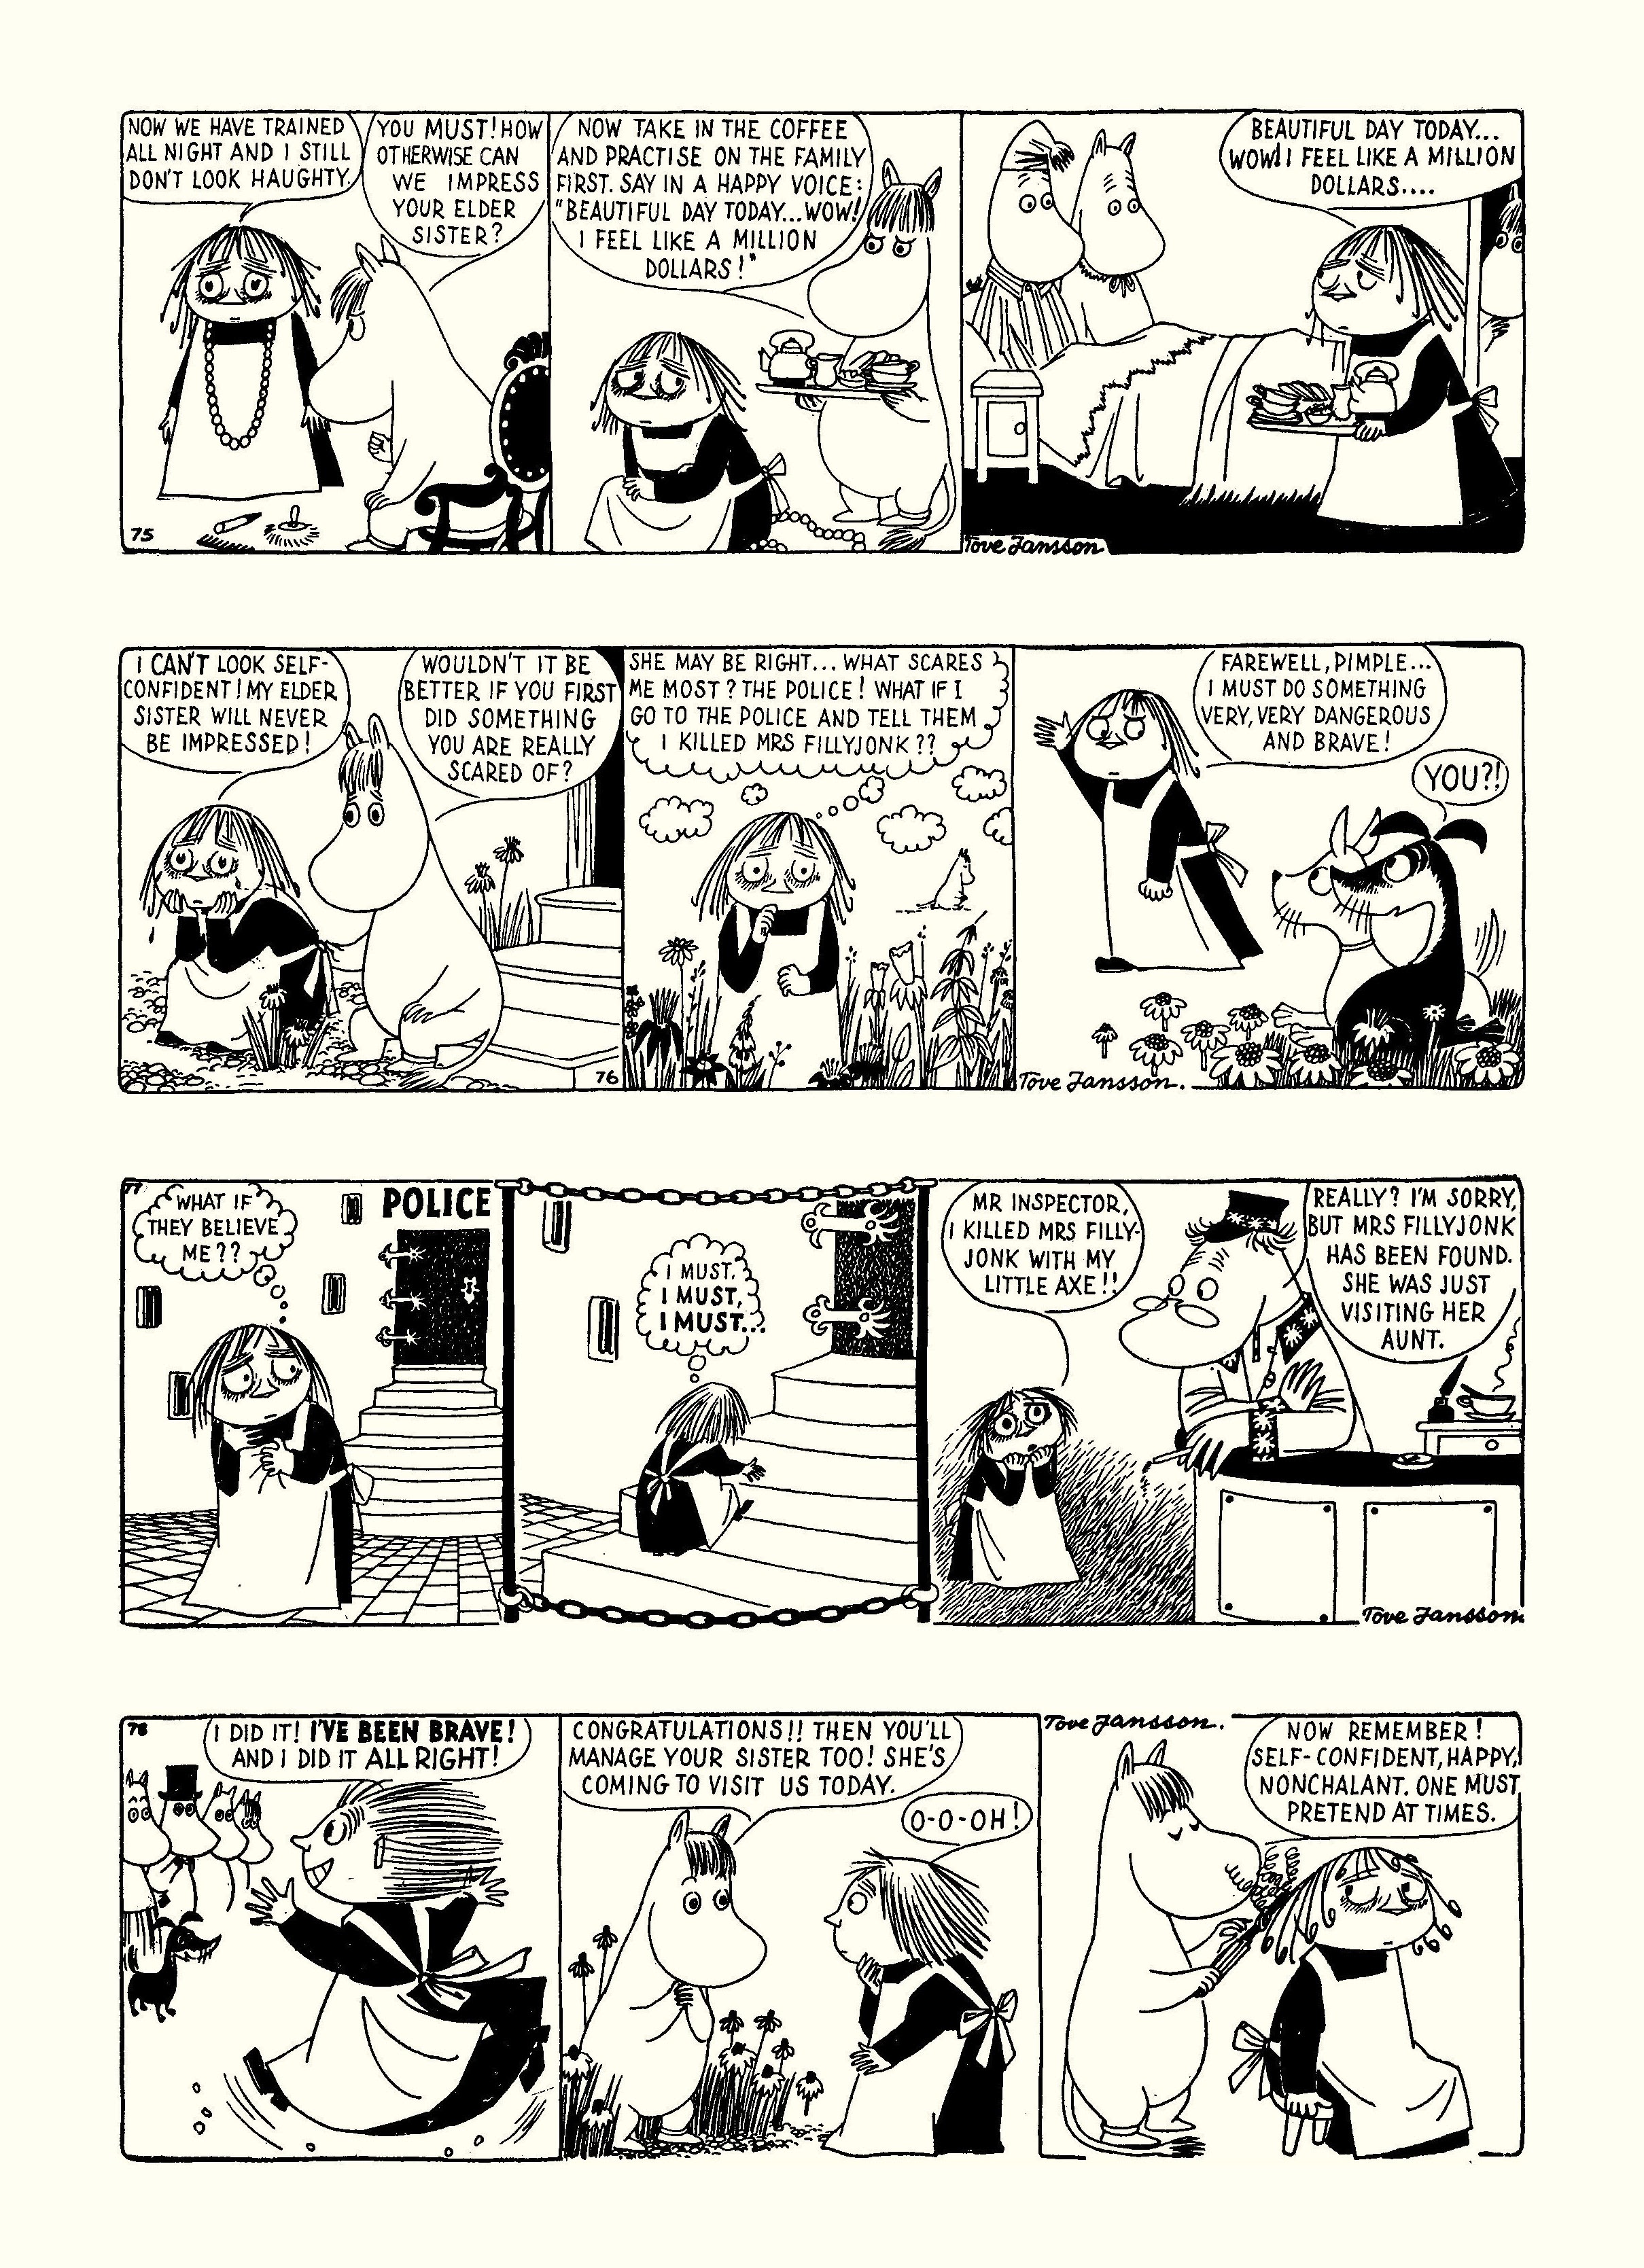 Read online Moomin: The Complete Tove Jansson Comic Strip comic -  Issue # TPB 2 - 46